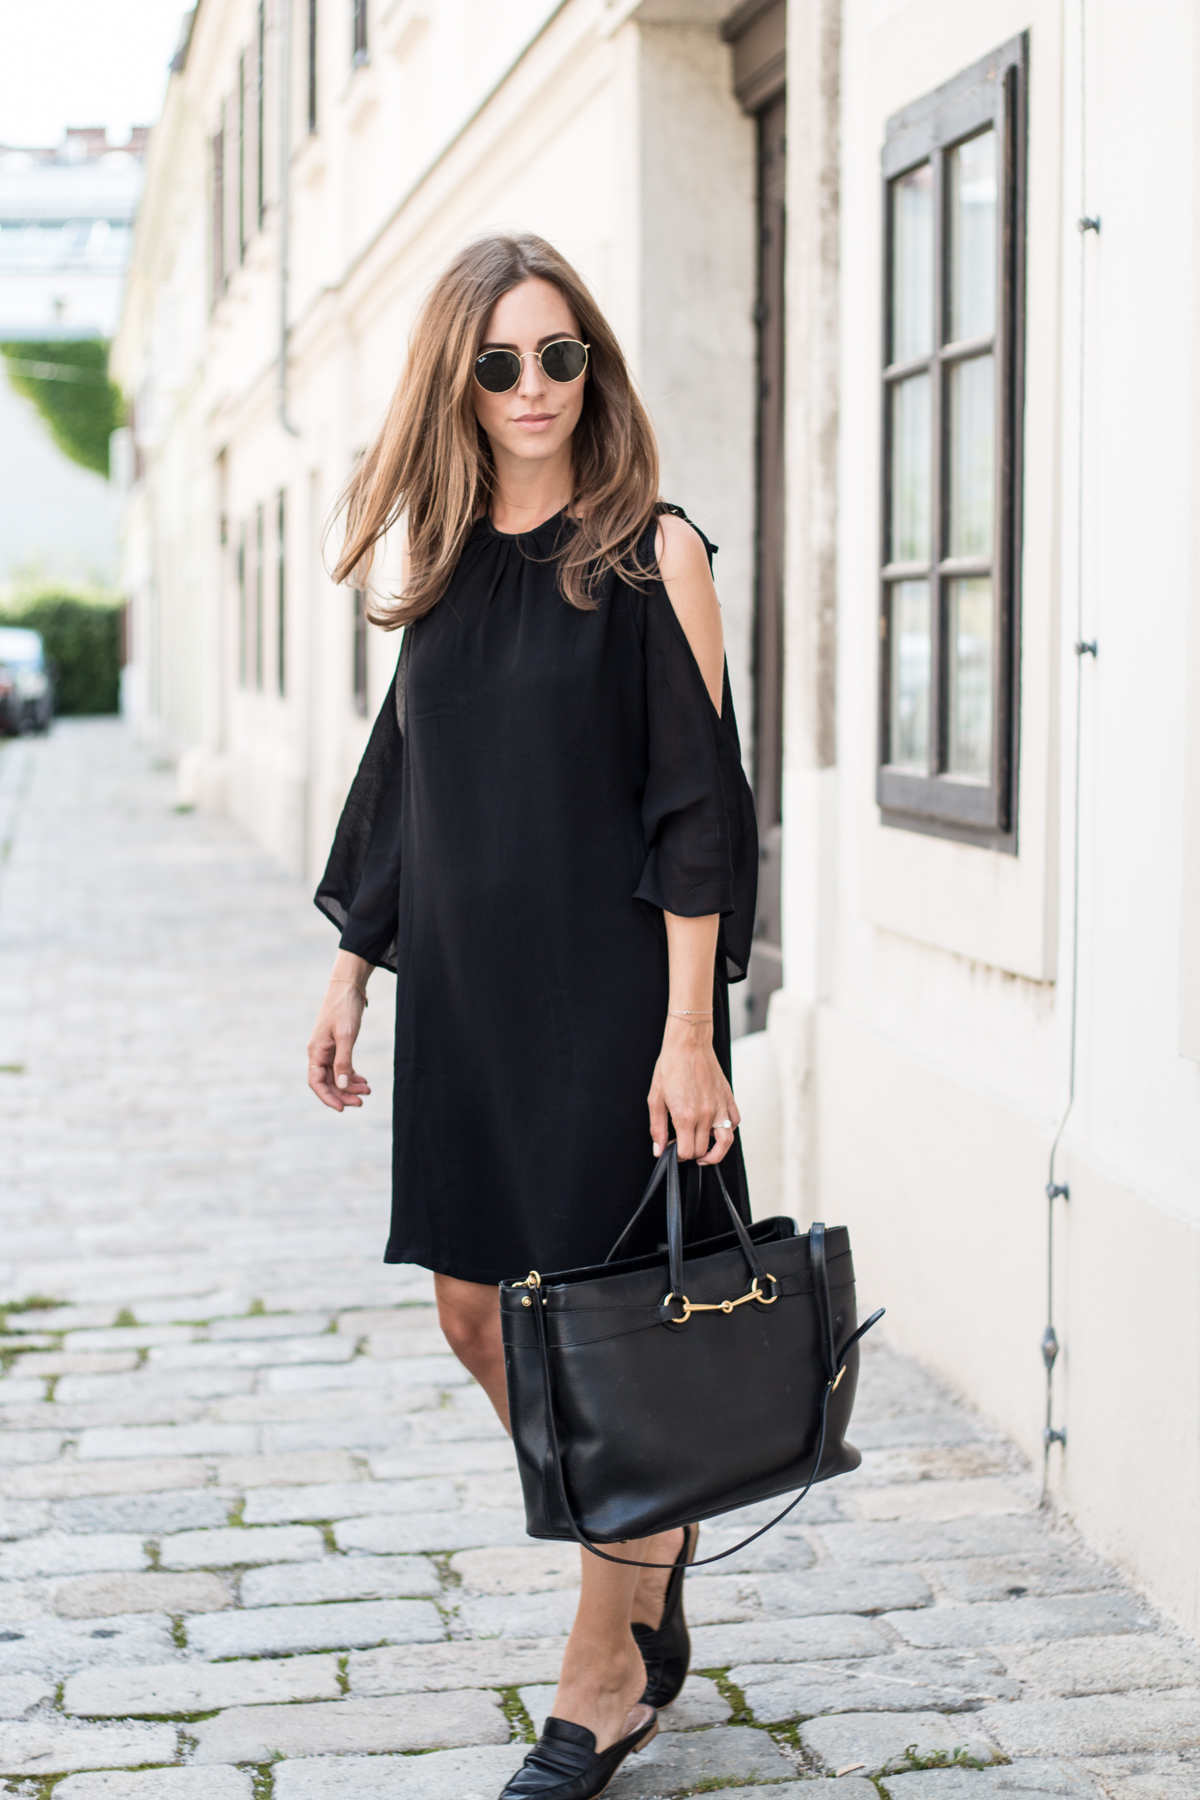 LBD Dressed Down | The Daily Dose